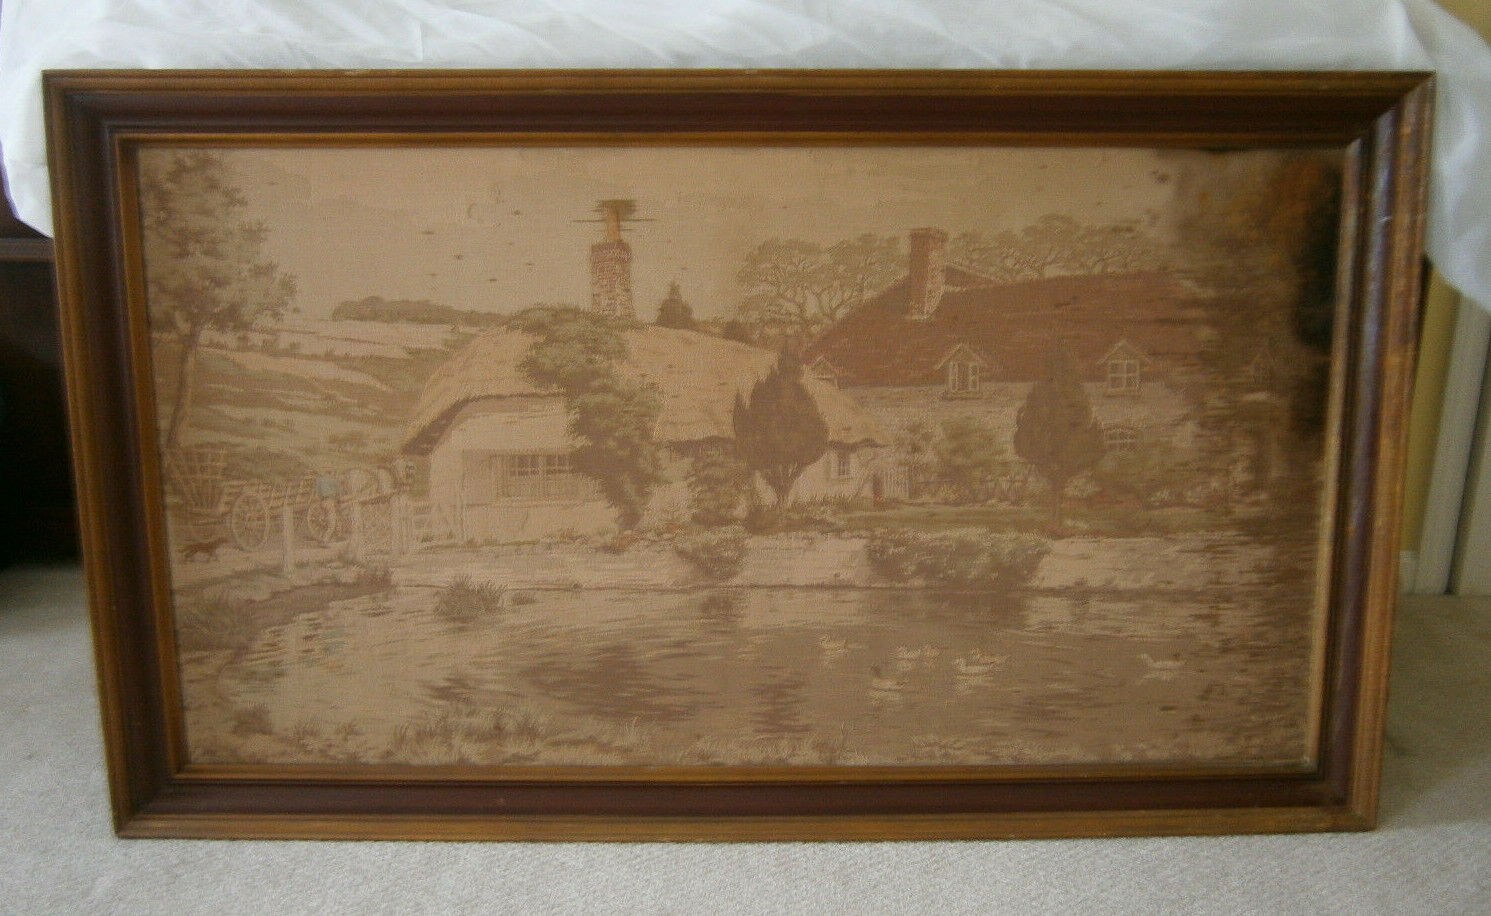 WALL HANGING TAPESTRY COUNTRY SCENE 56 1/2"X33" FRAMED TAKE APART FOR SHIPING